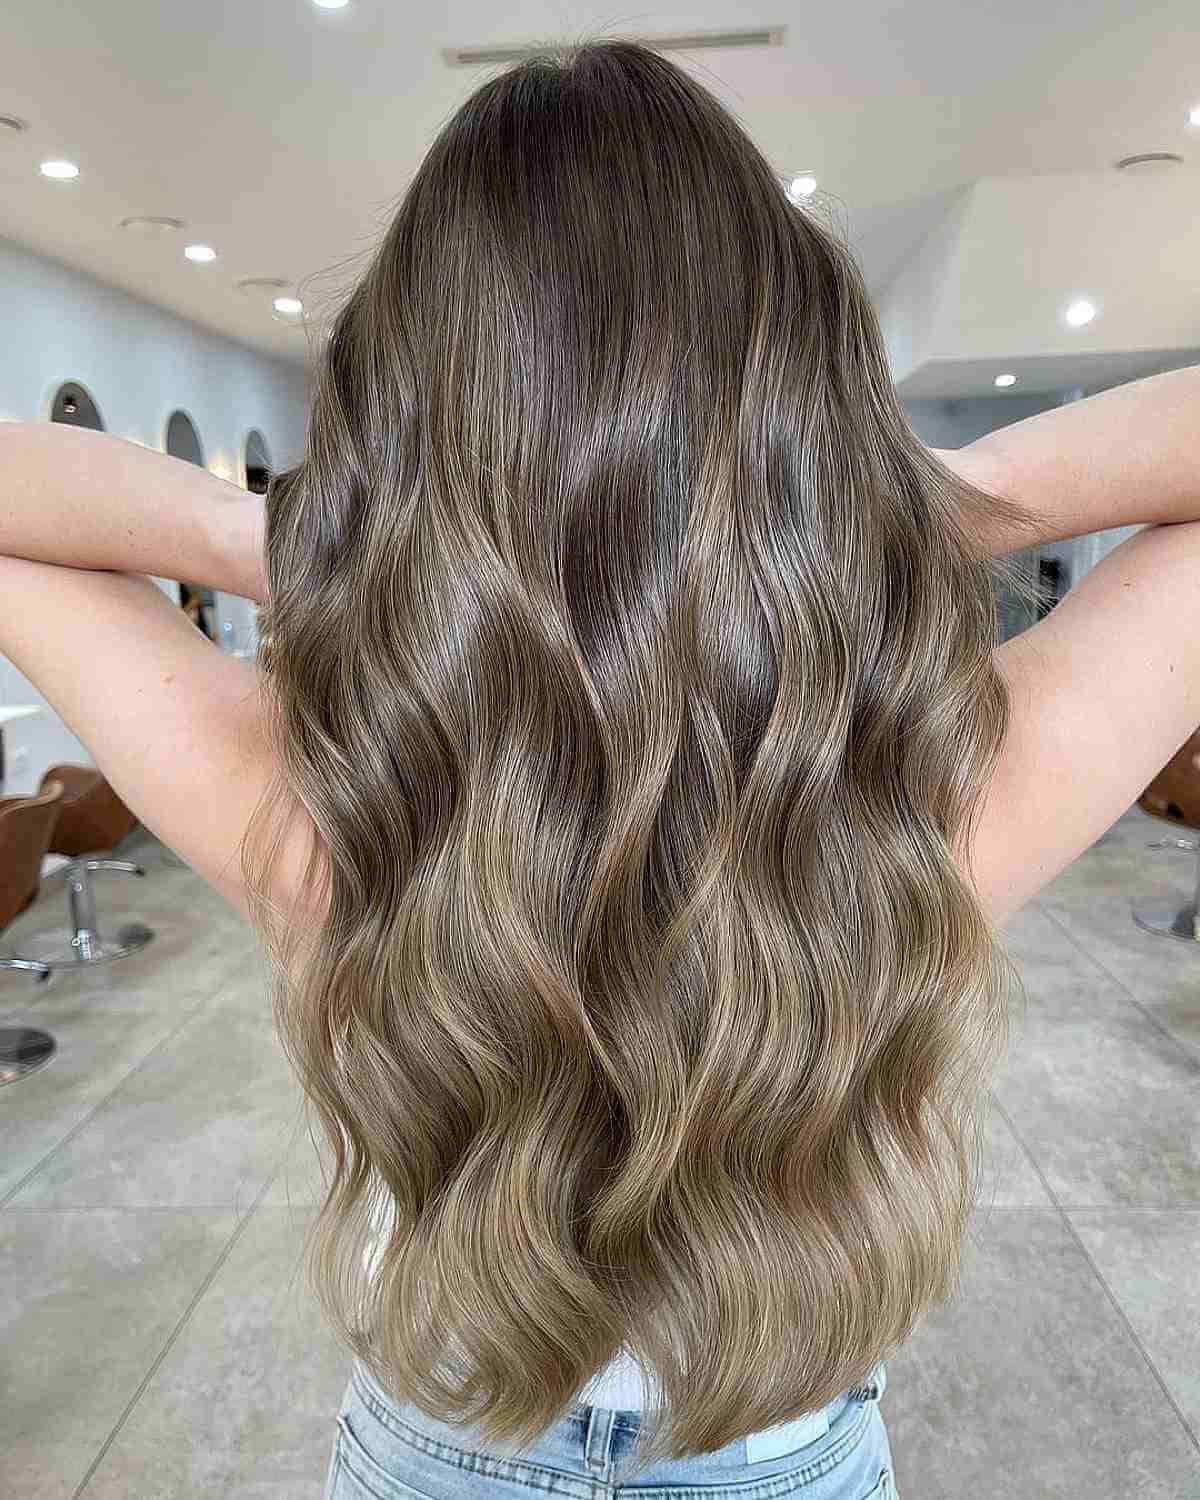 Melted Light Sandy Brown Wavy Hair